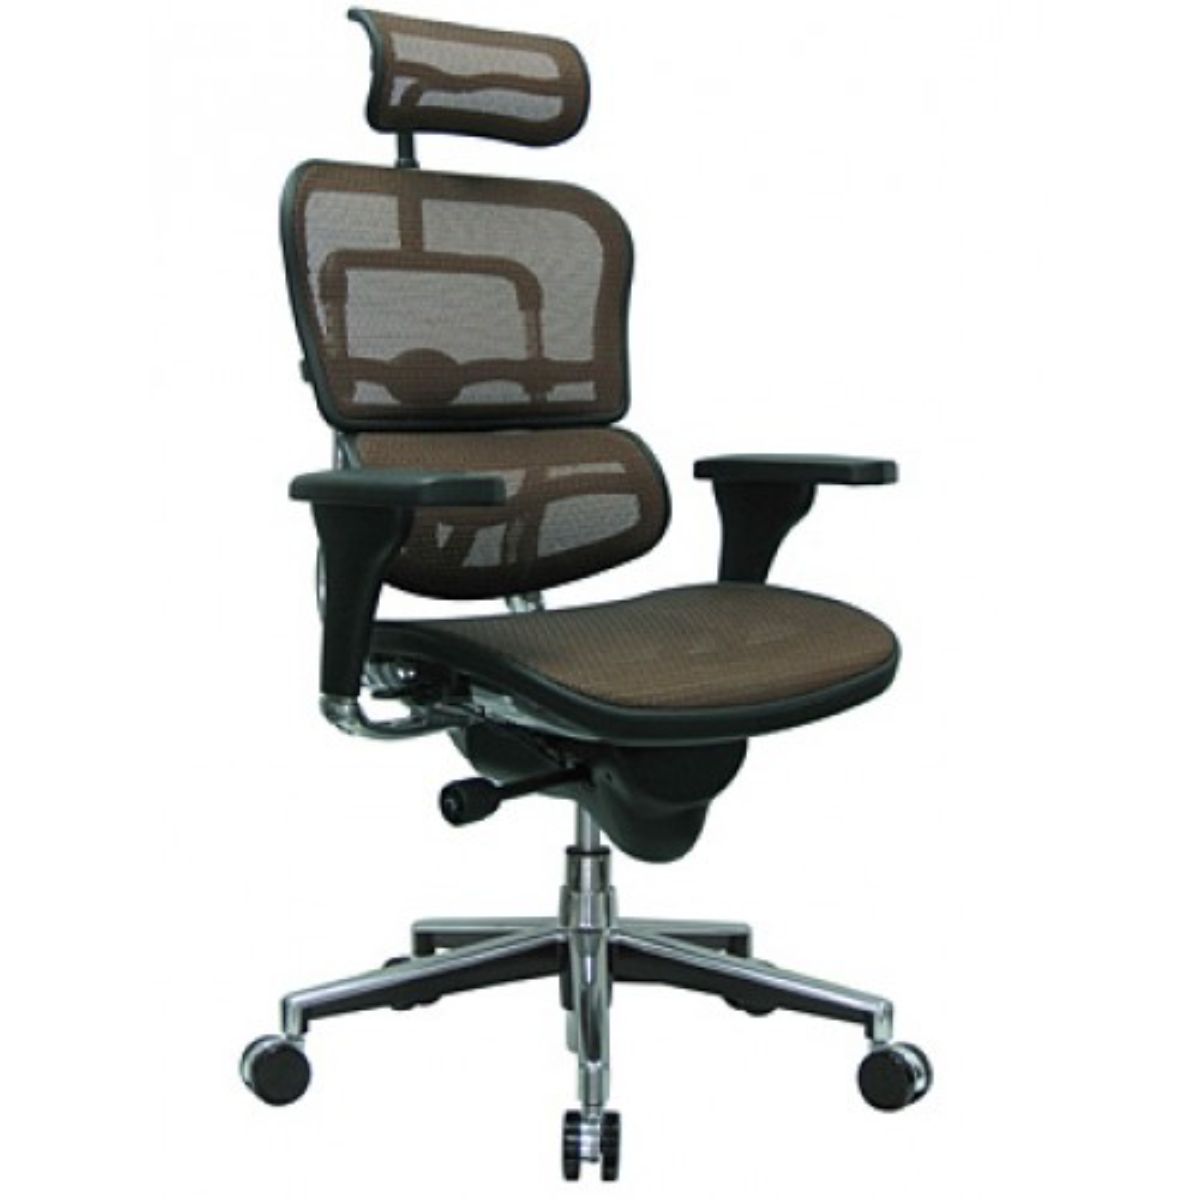 Black and Silver Adjustable Swivel Mesh Rolling Executive Office Chair-372396-1